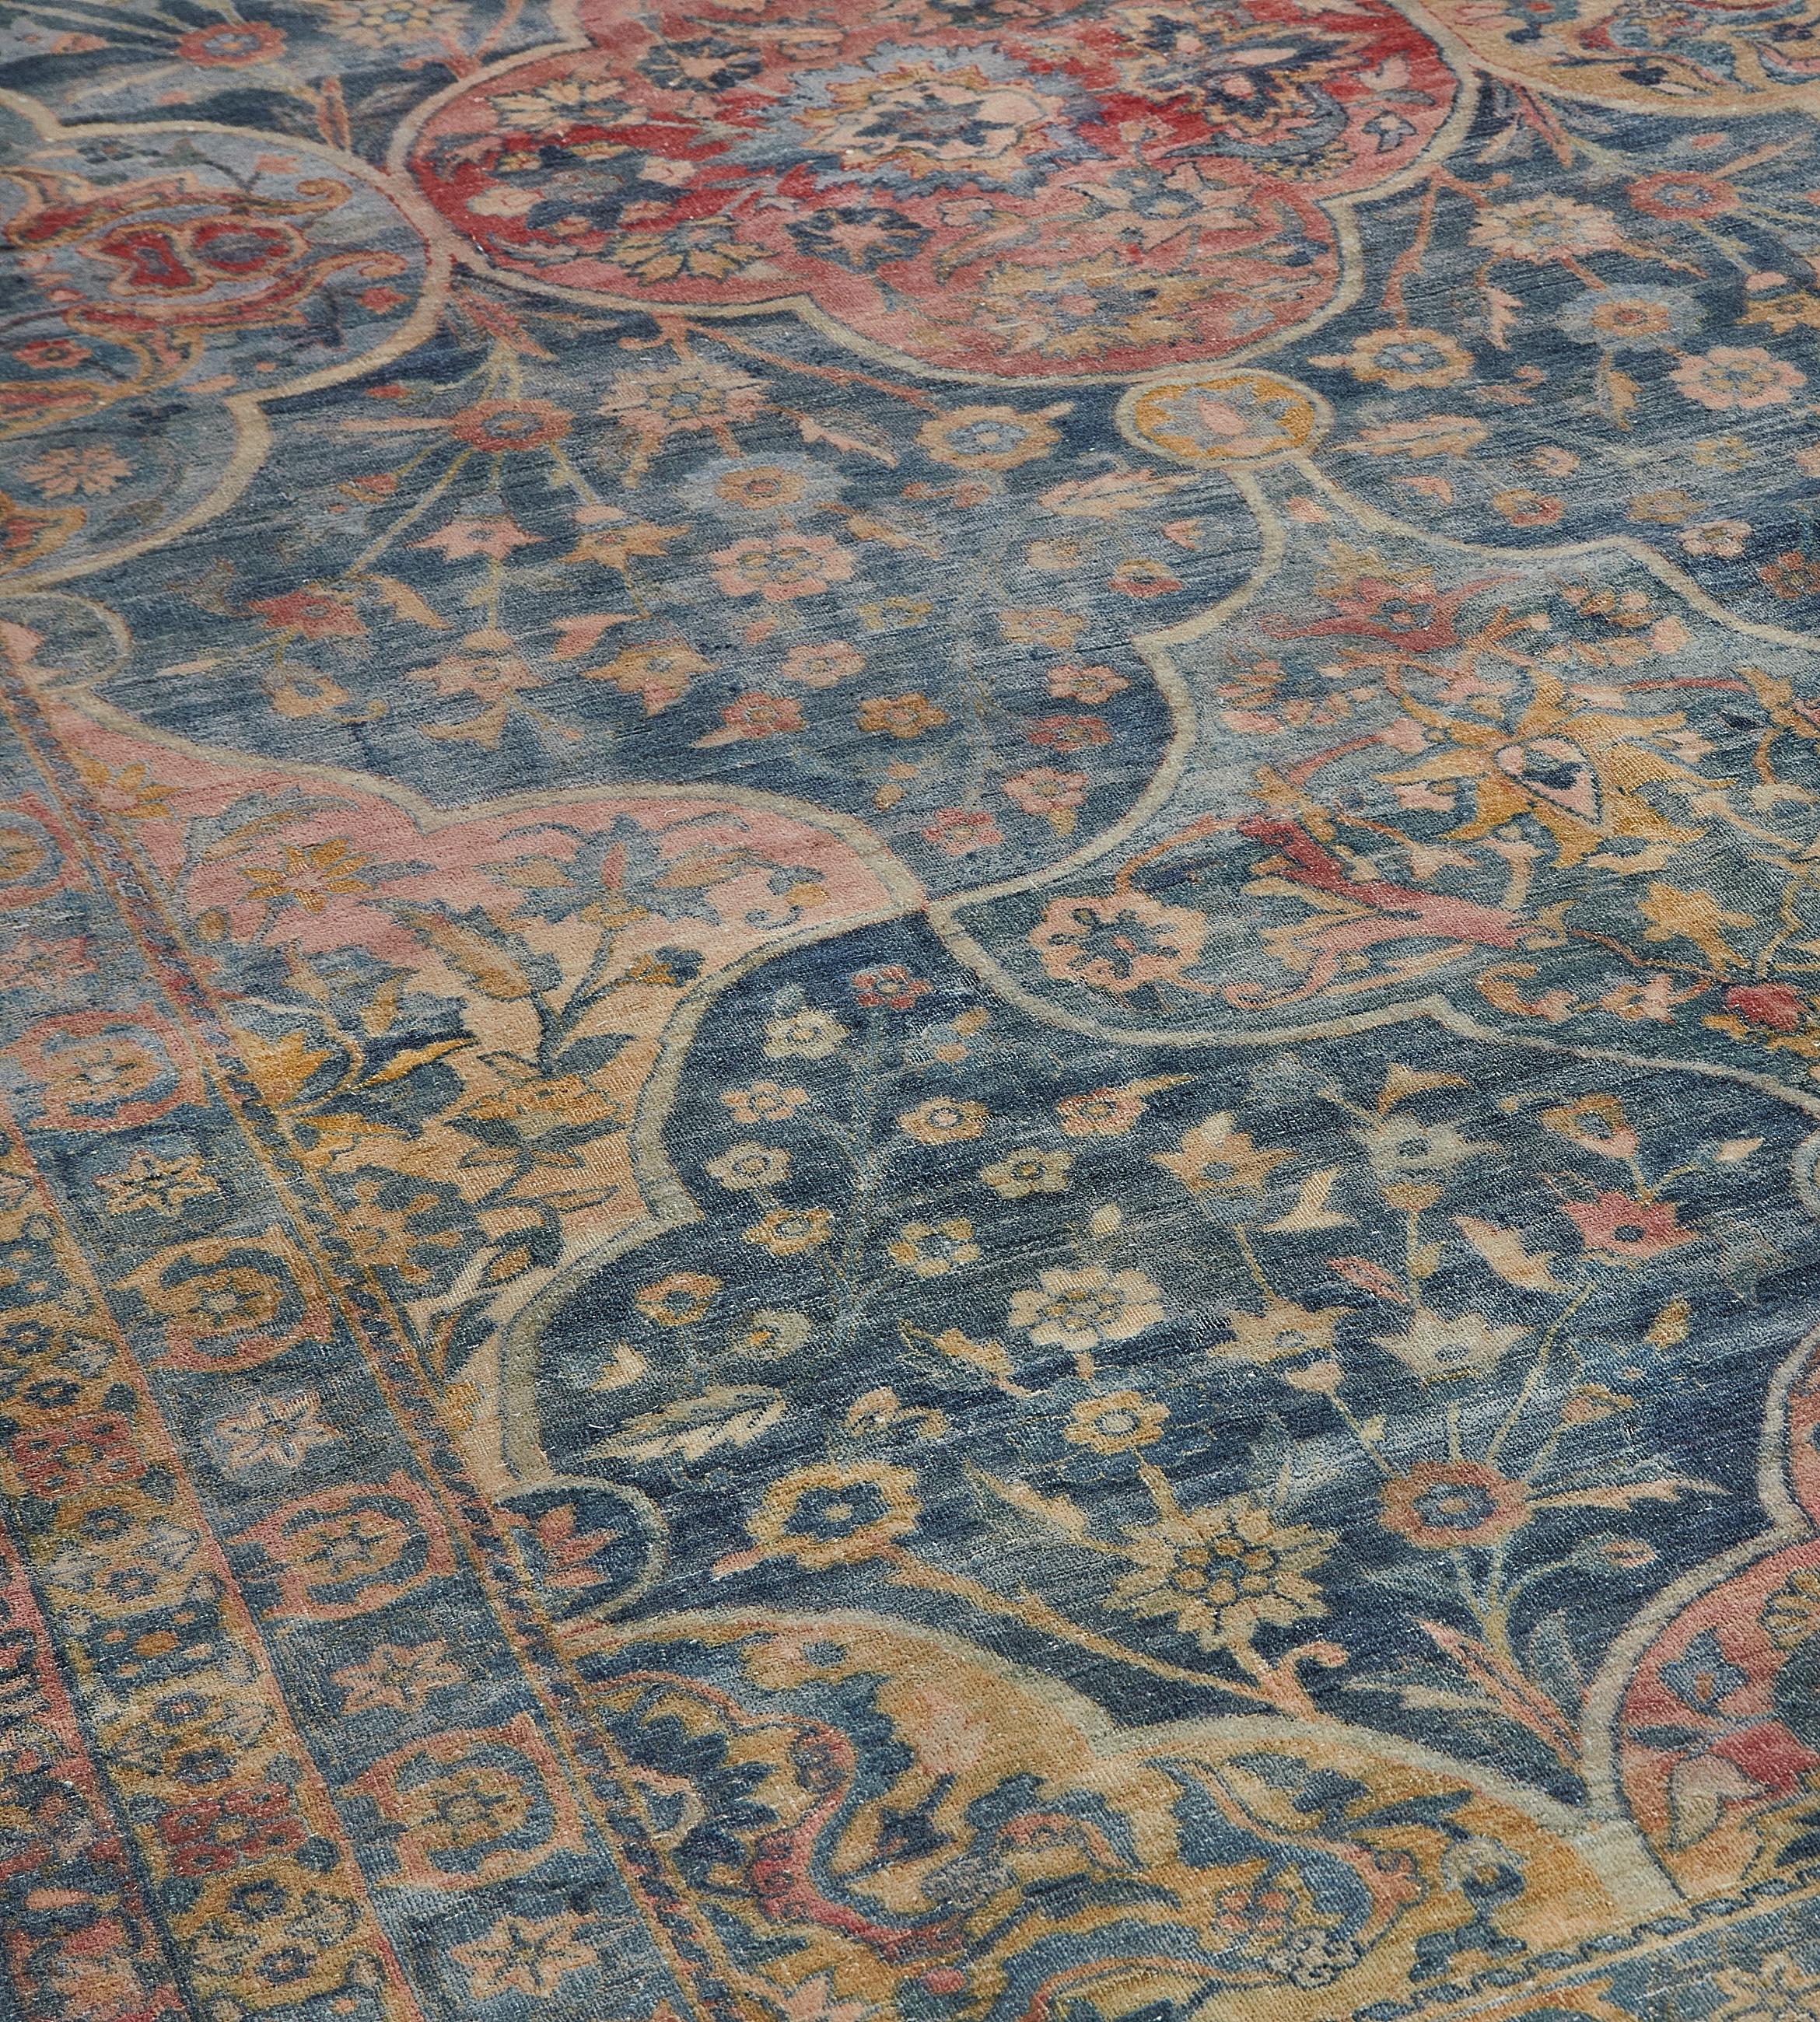 This antique Persian Kirman rug has a sea-blue field with a variety of delicate floral sprays around vertical rows of brick-red, golden-yellow and light blue palmettes alternating with cusped palmettes each containing a central flowerhead surrounded